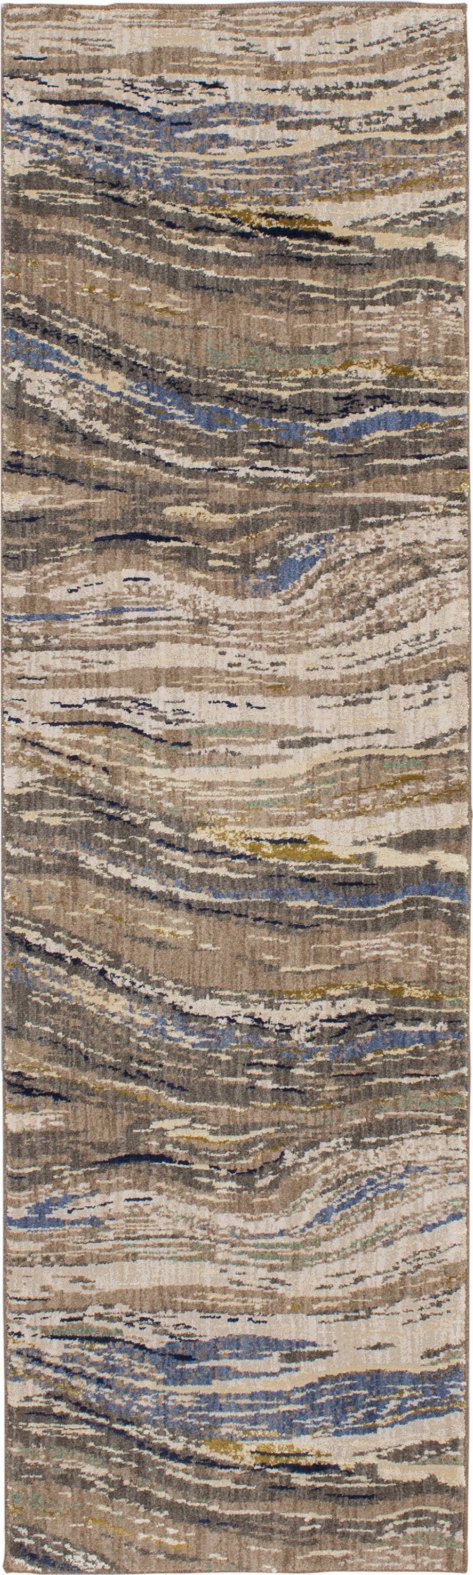 Contemporary & Transitional Rugs Enigma Continuum 90968-90116 Ivory - Beige & Multi Machine Made Rug